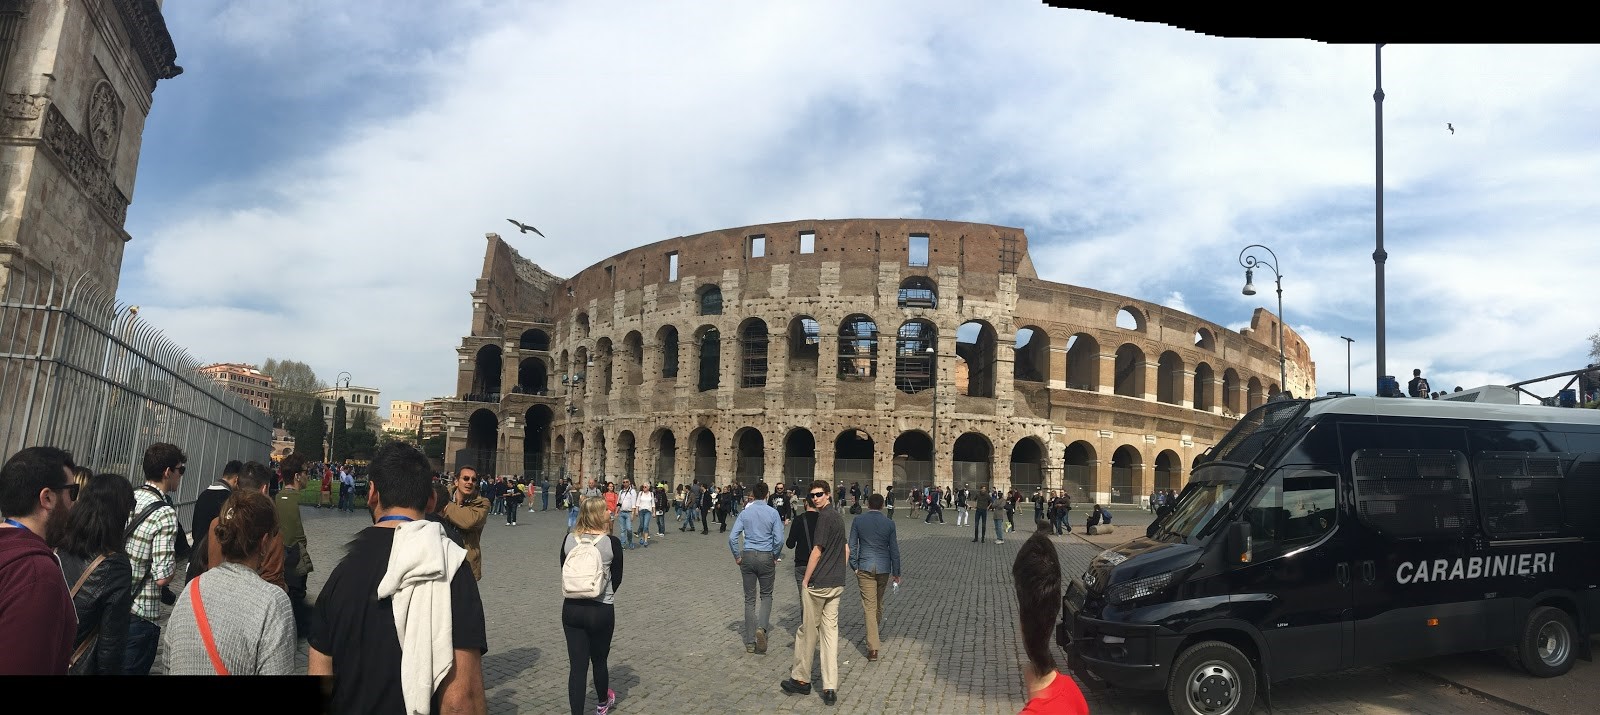 A picture of the roman colosseum